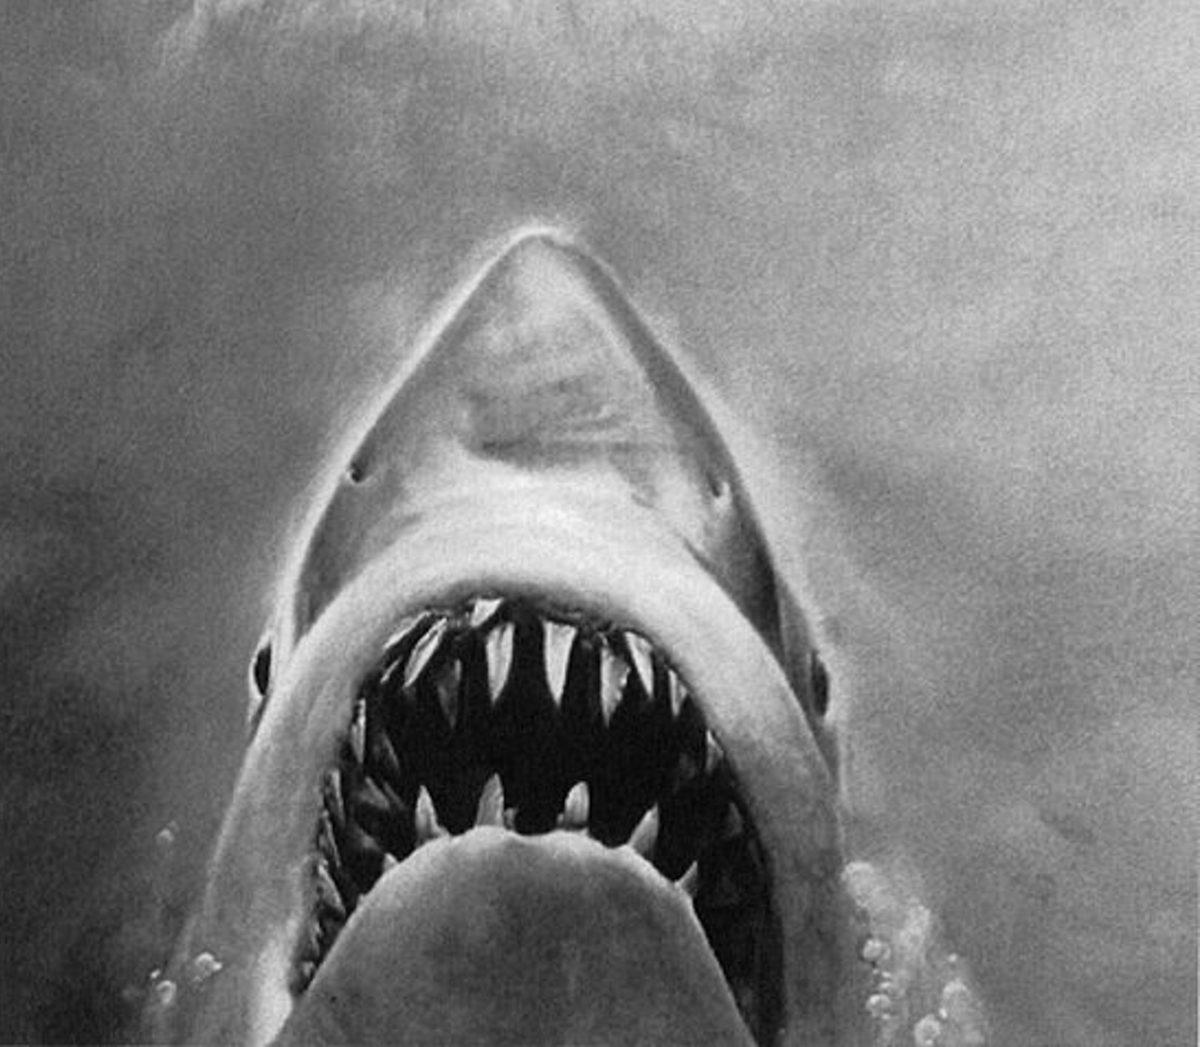 The main antagonist of the Jaws franchise, Bruce, swims toward the ocean surface on the 1975 Jaws book cover.
Photo courtesy of WikimediaCommons